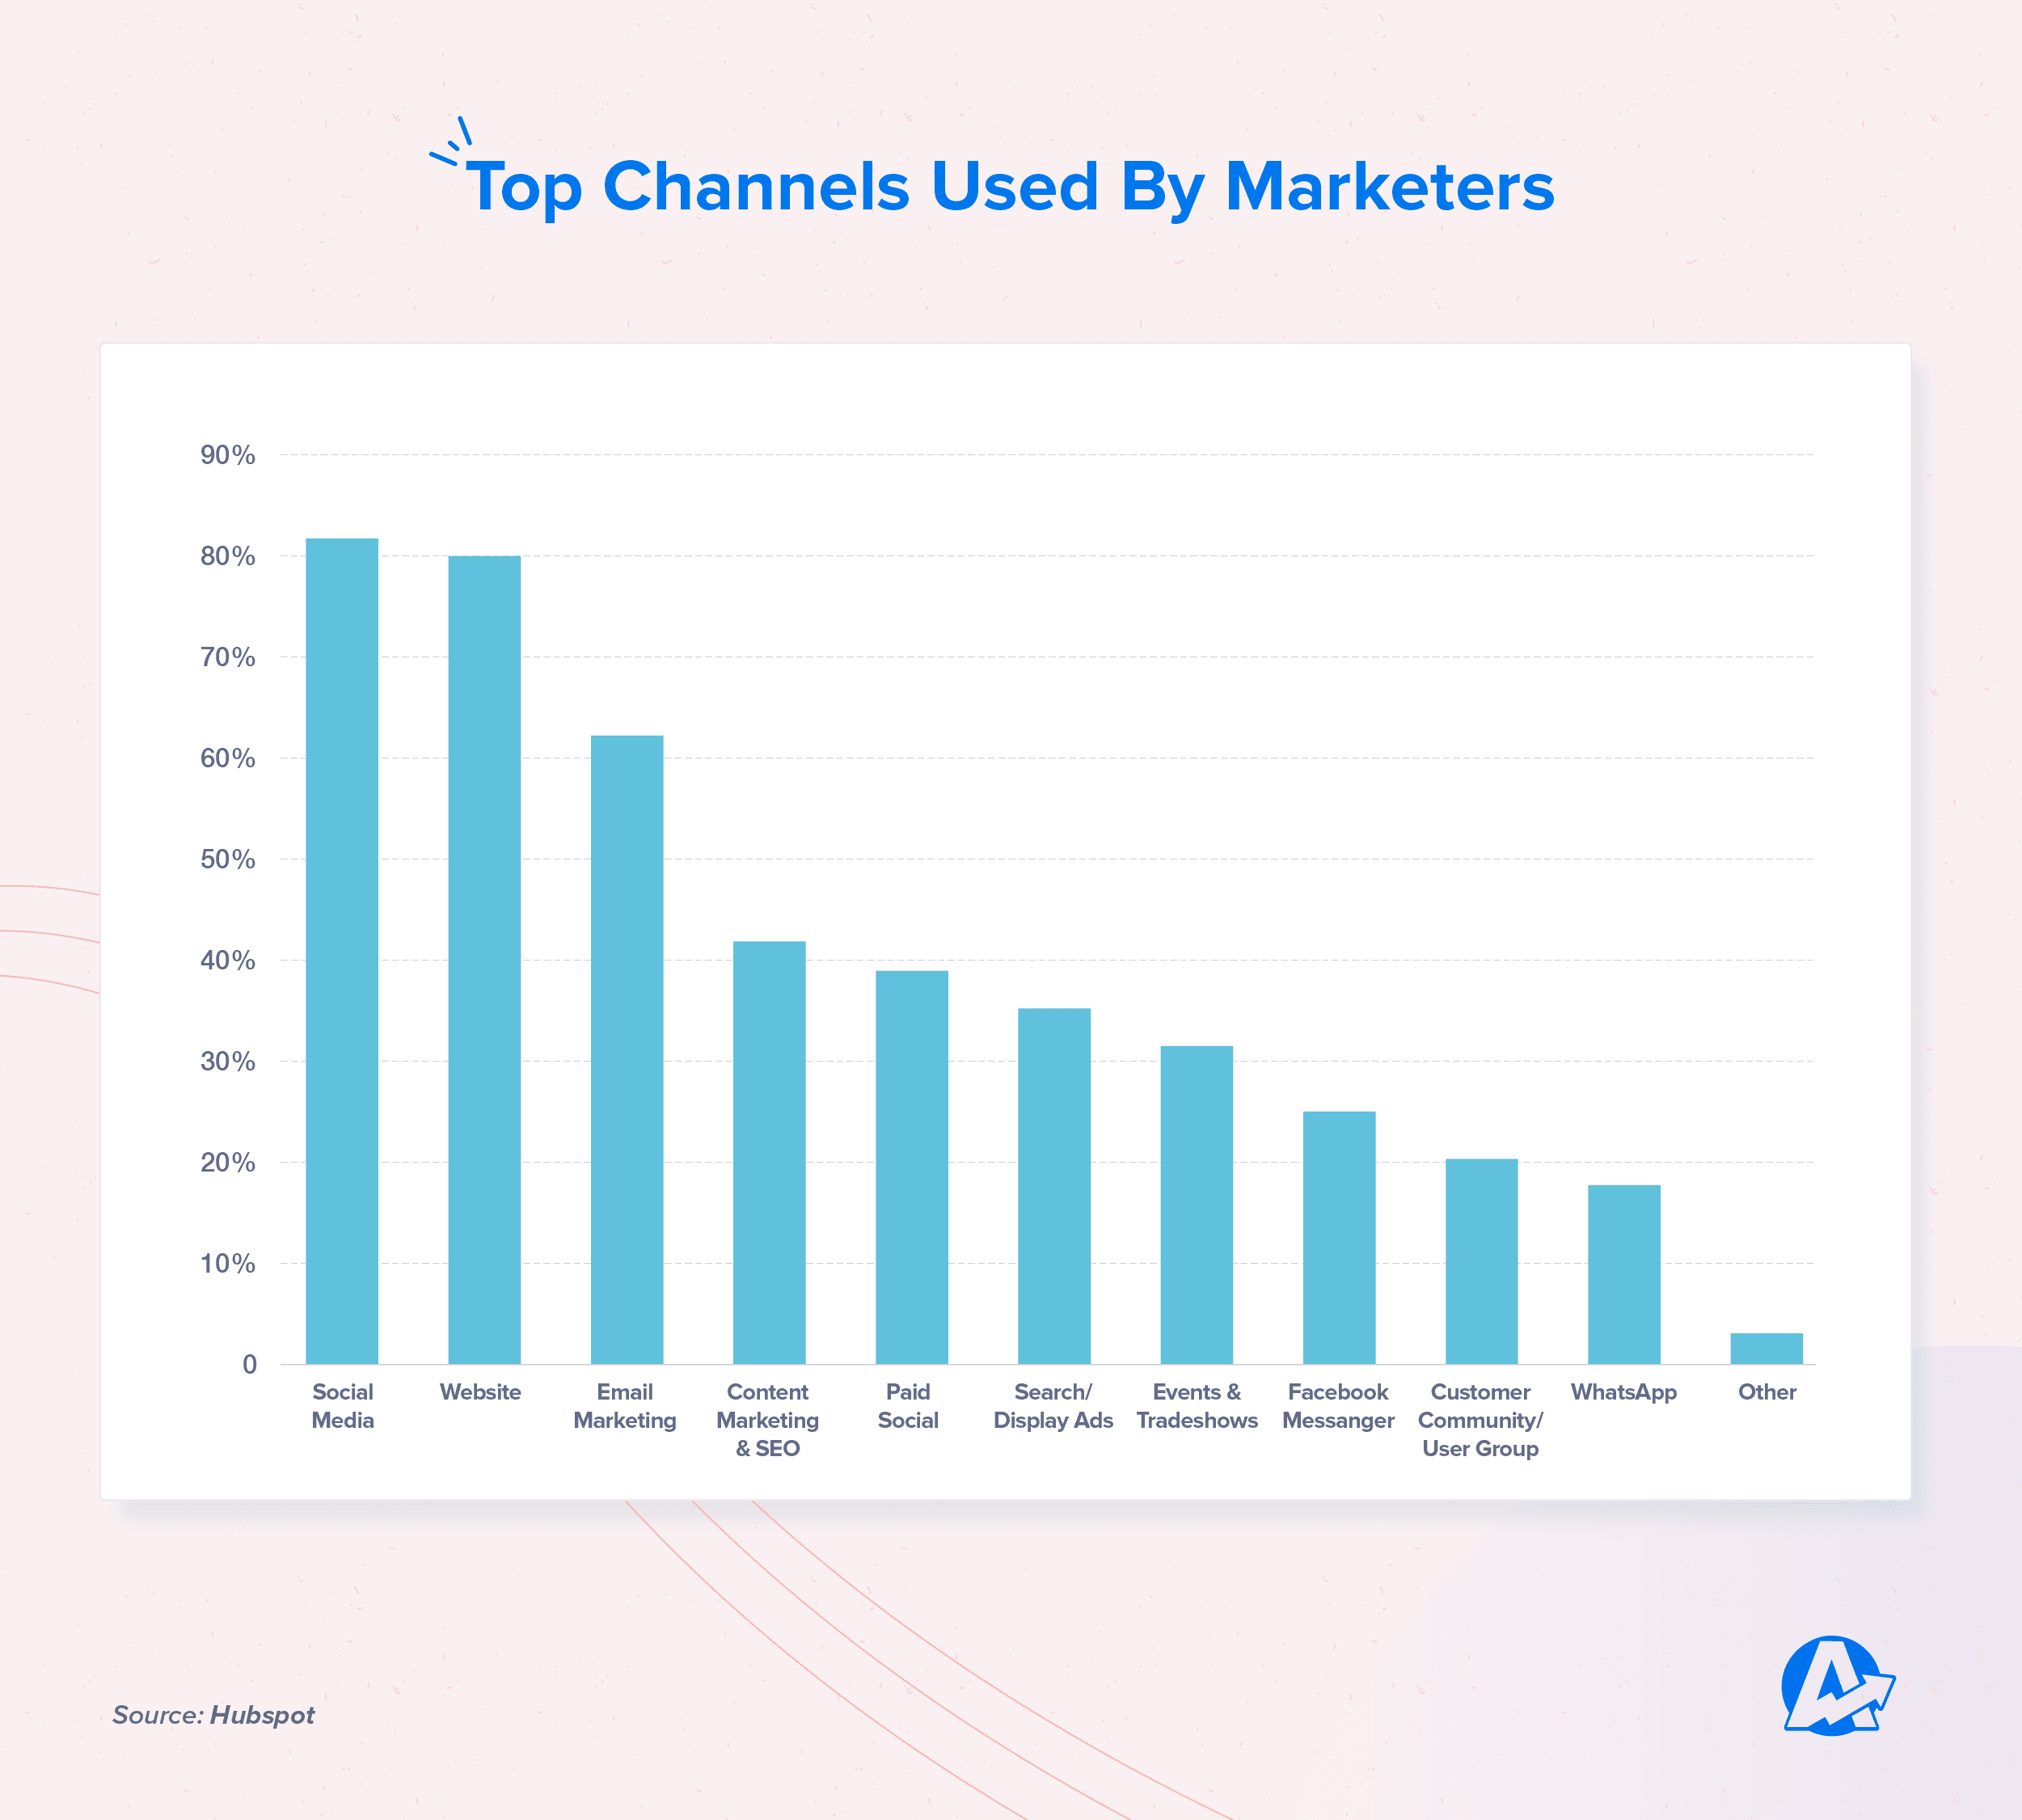 Top Acquisition Channels Used by Marketers